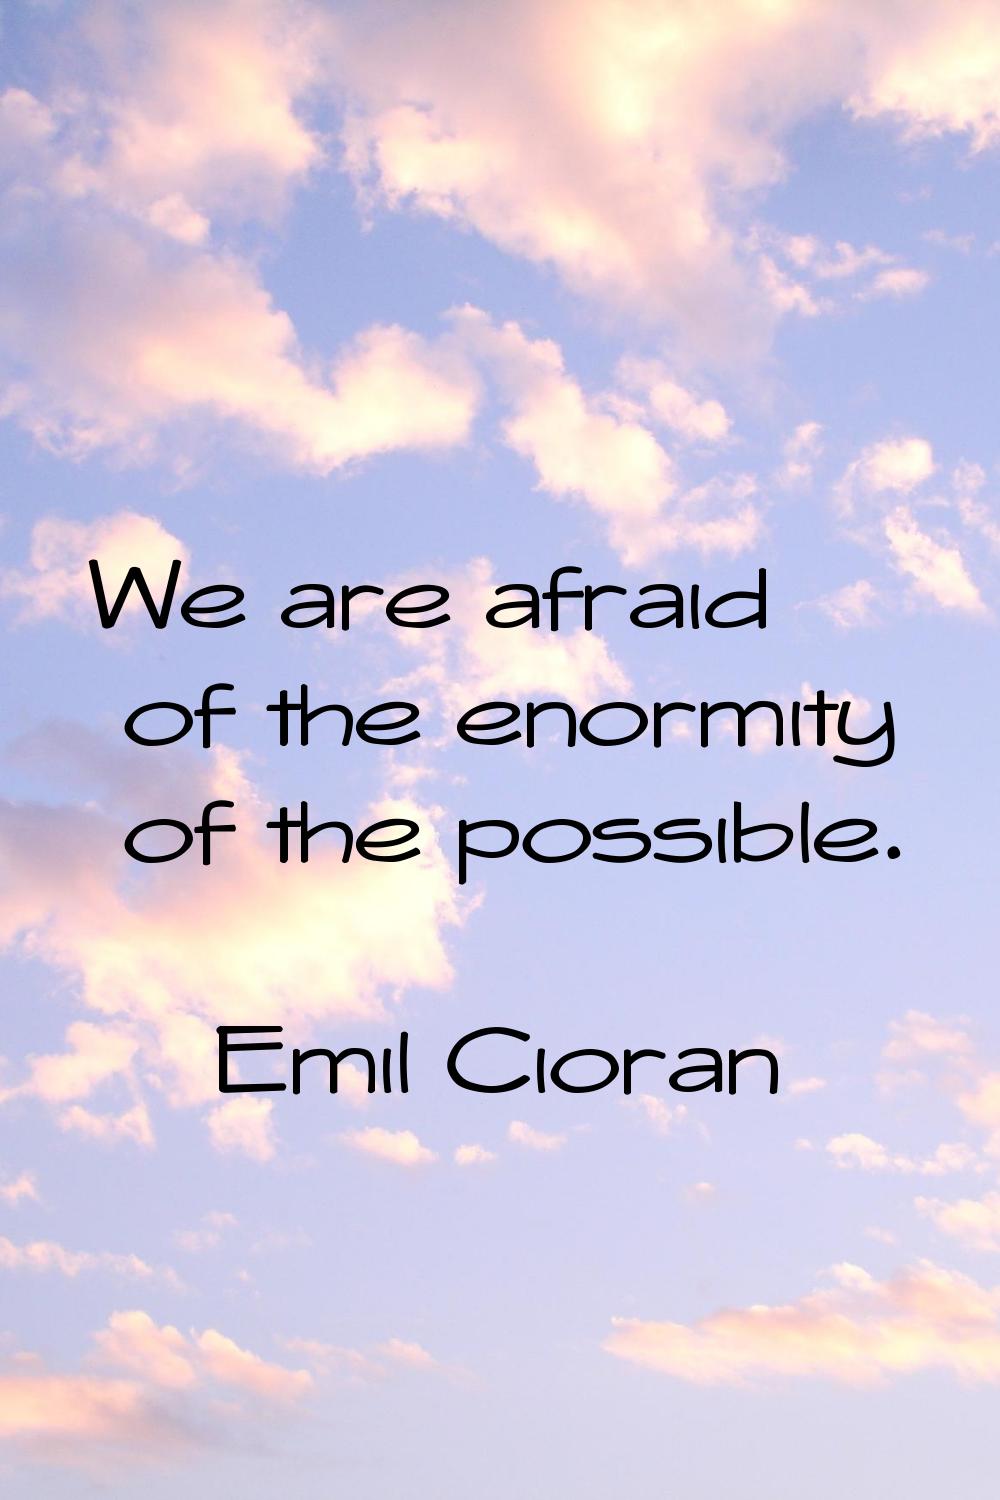 We are afraid of the enormity of the possible.